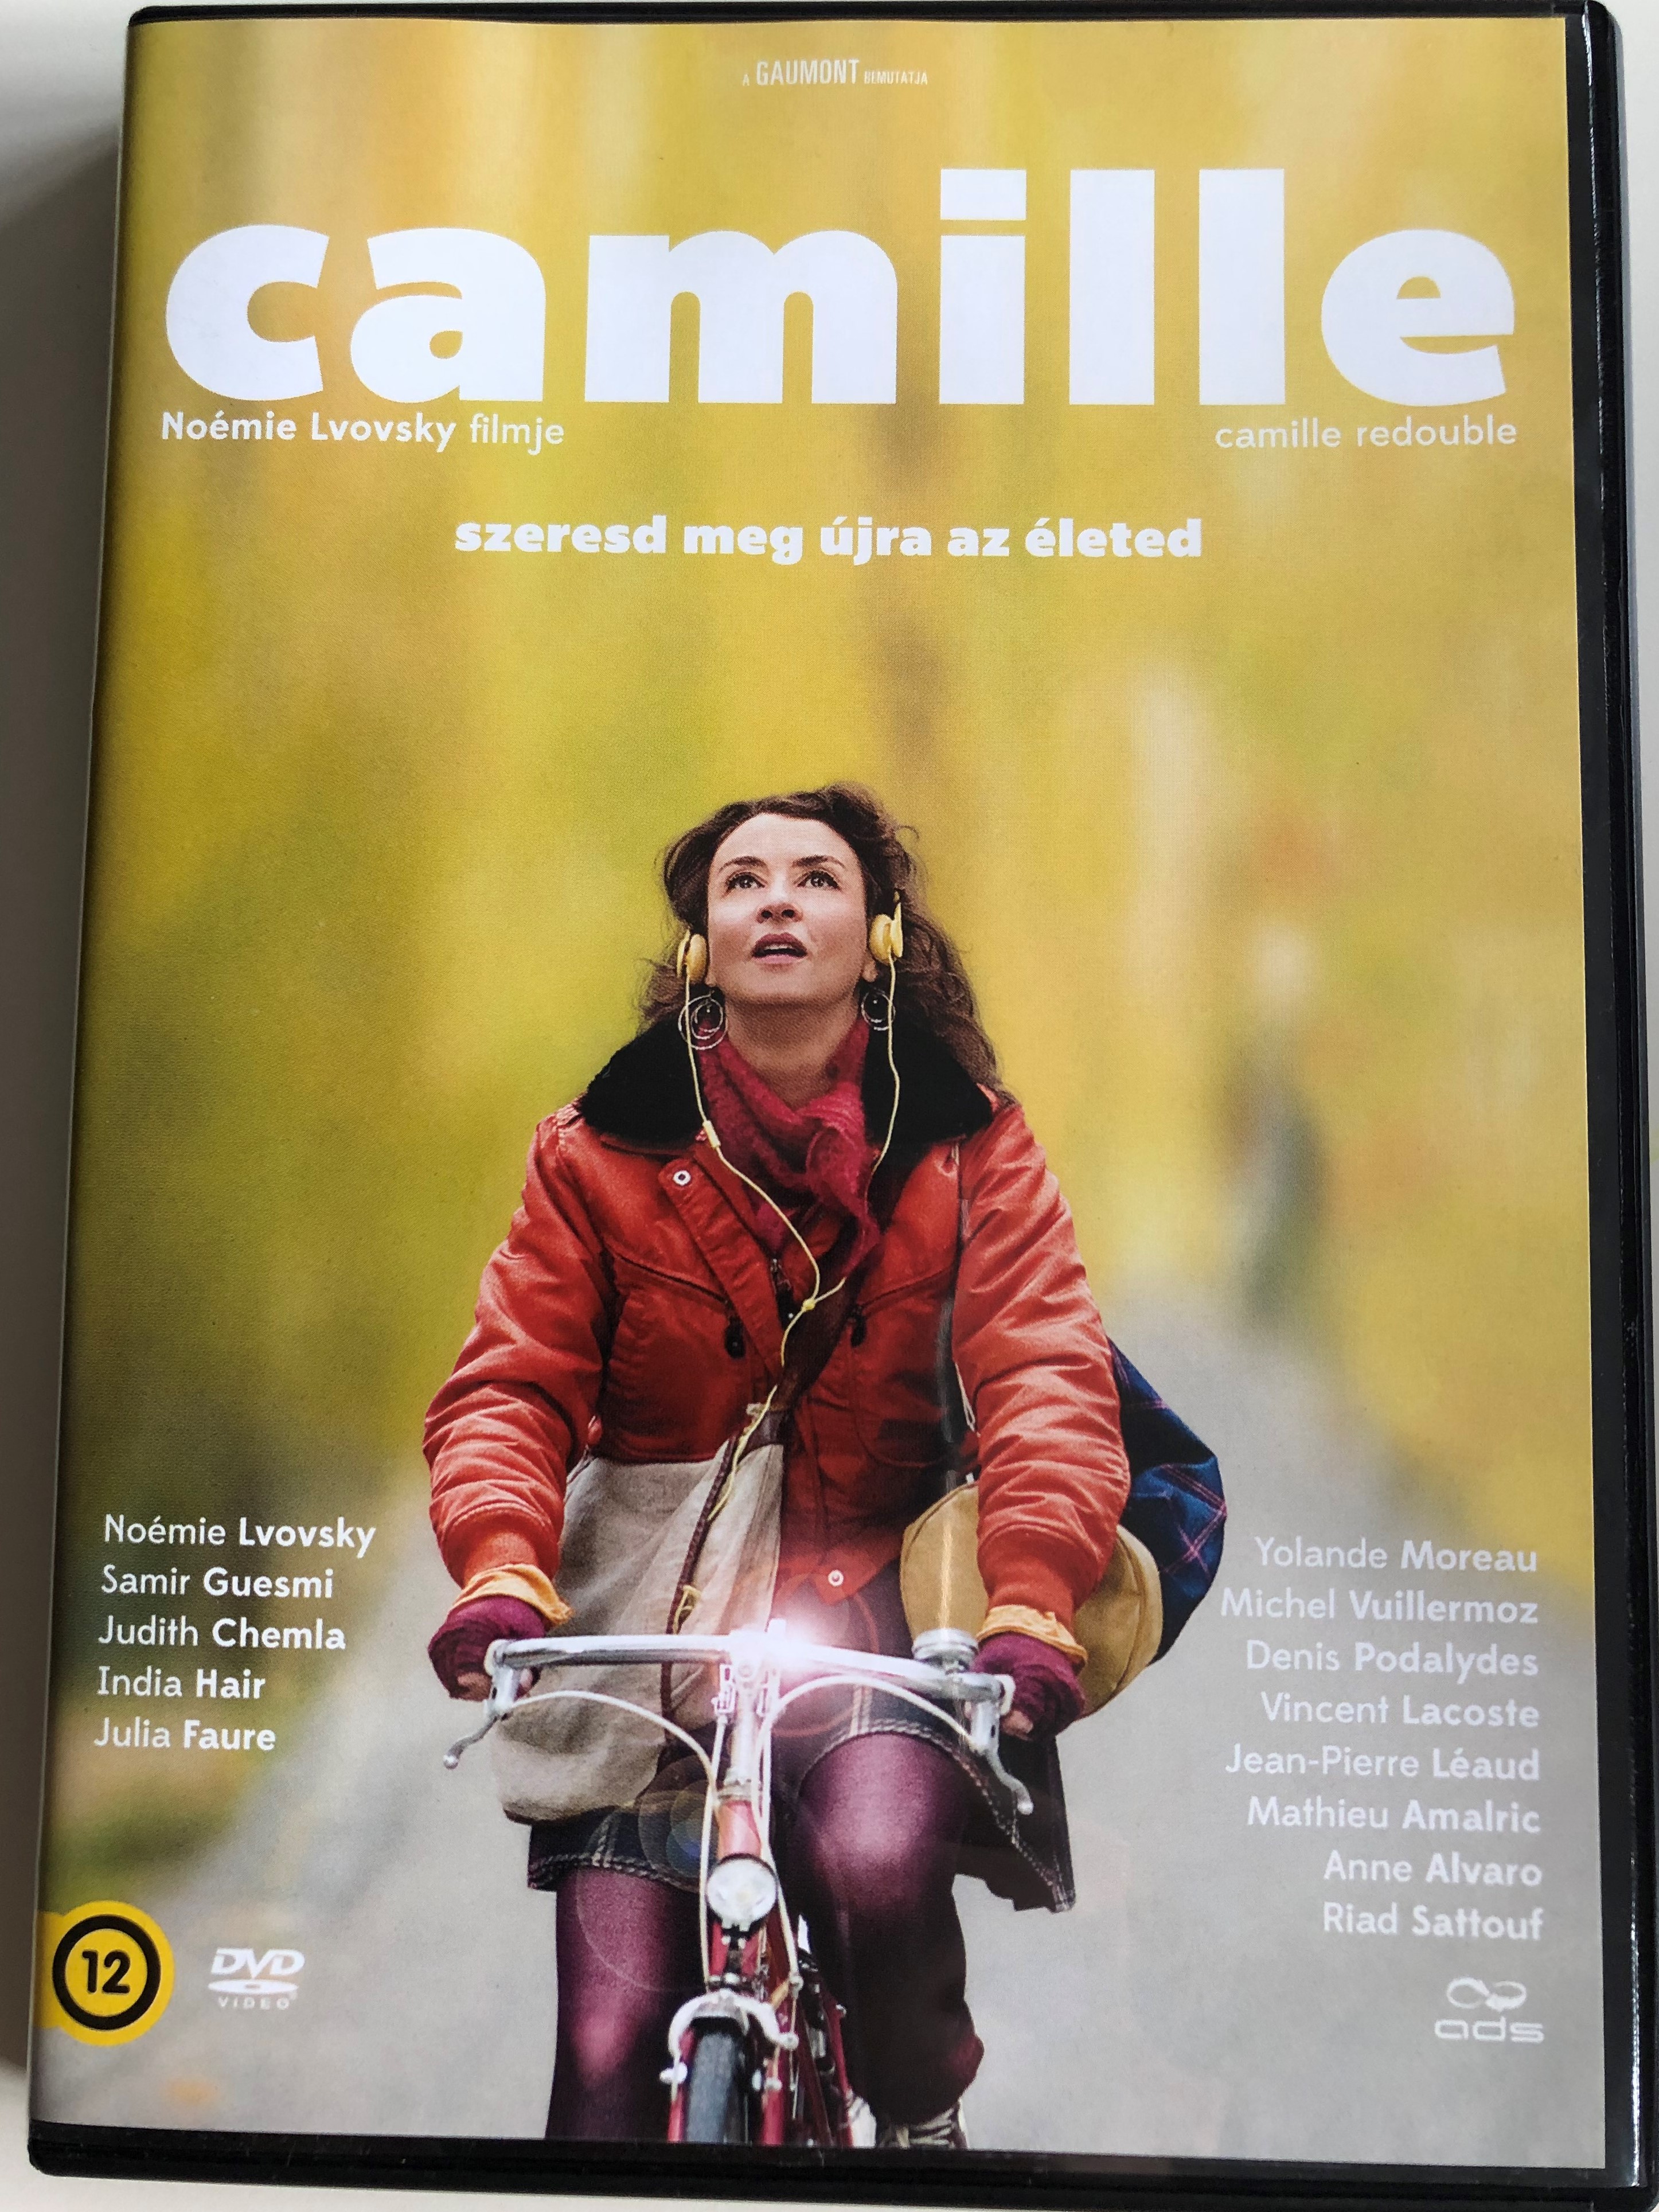 camille-redouble-dvd-2012-camille-camille-rewinds-1.jpg